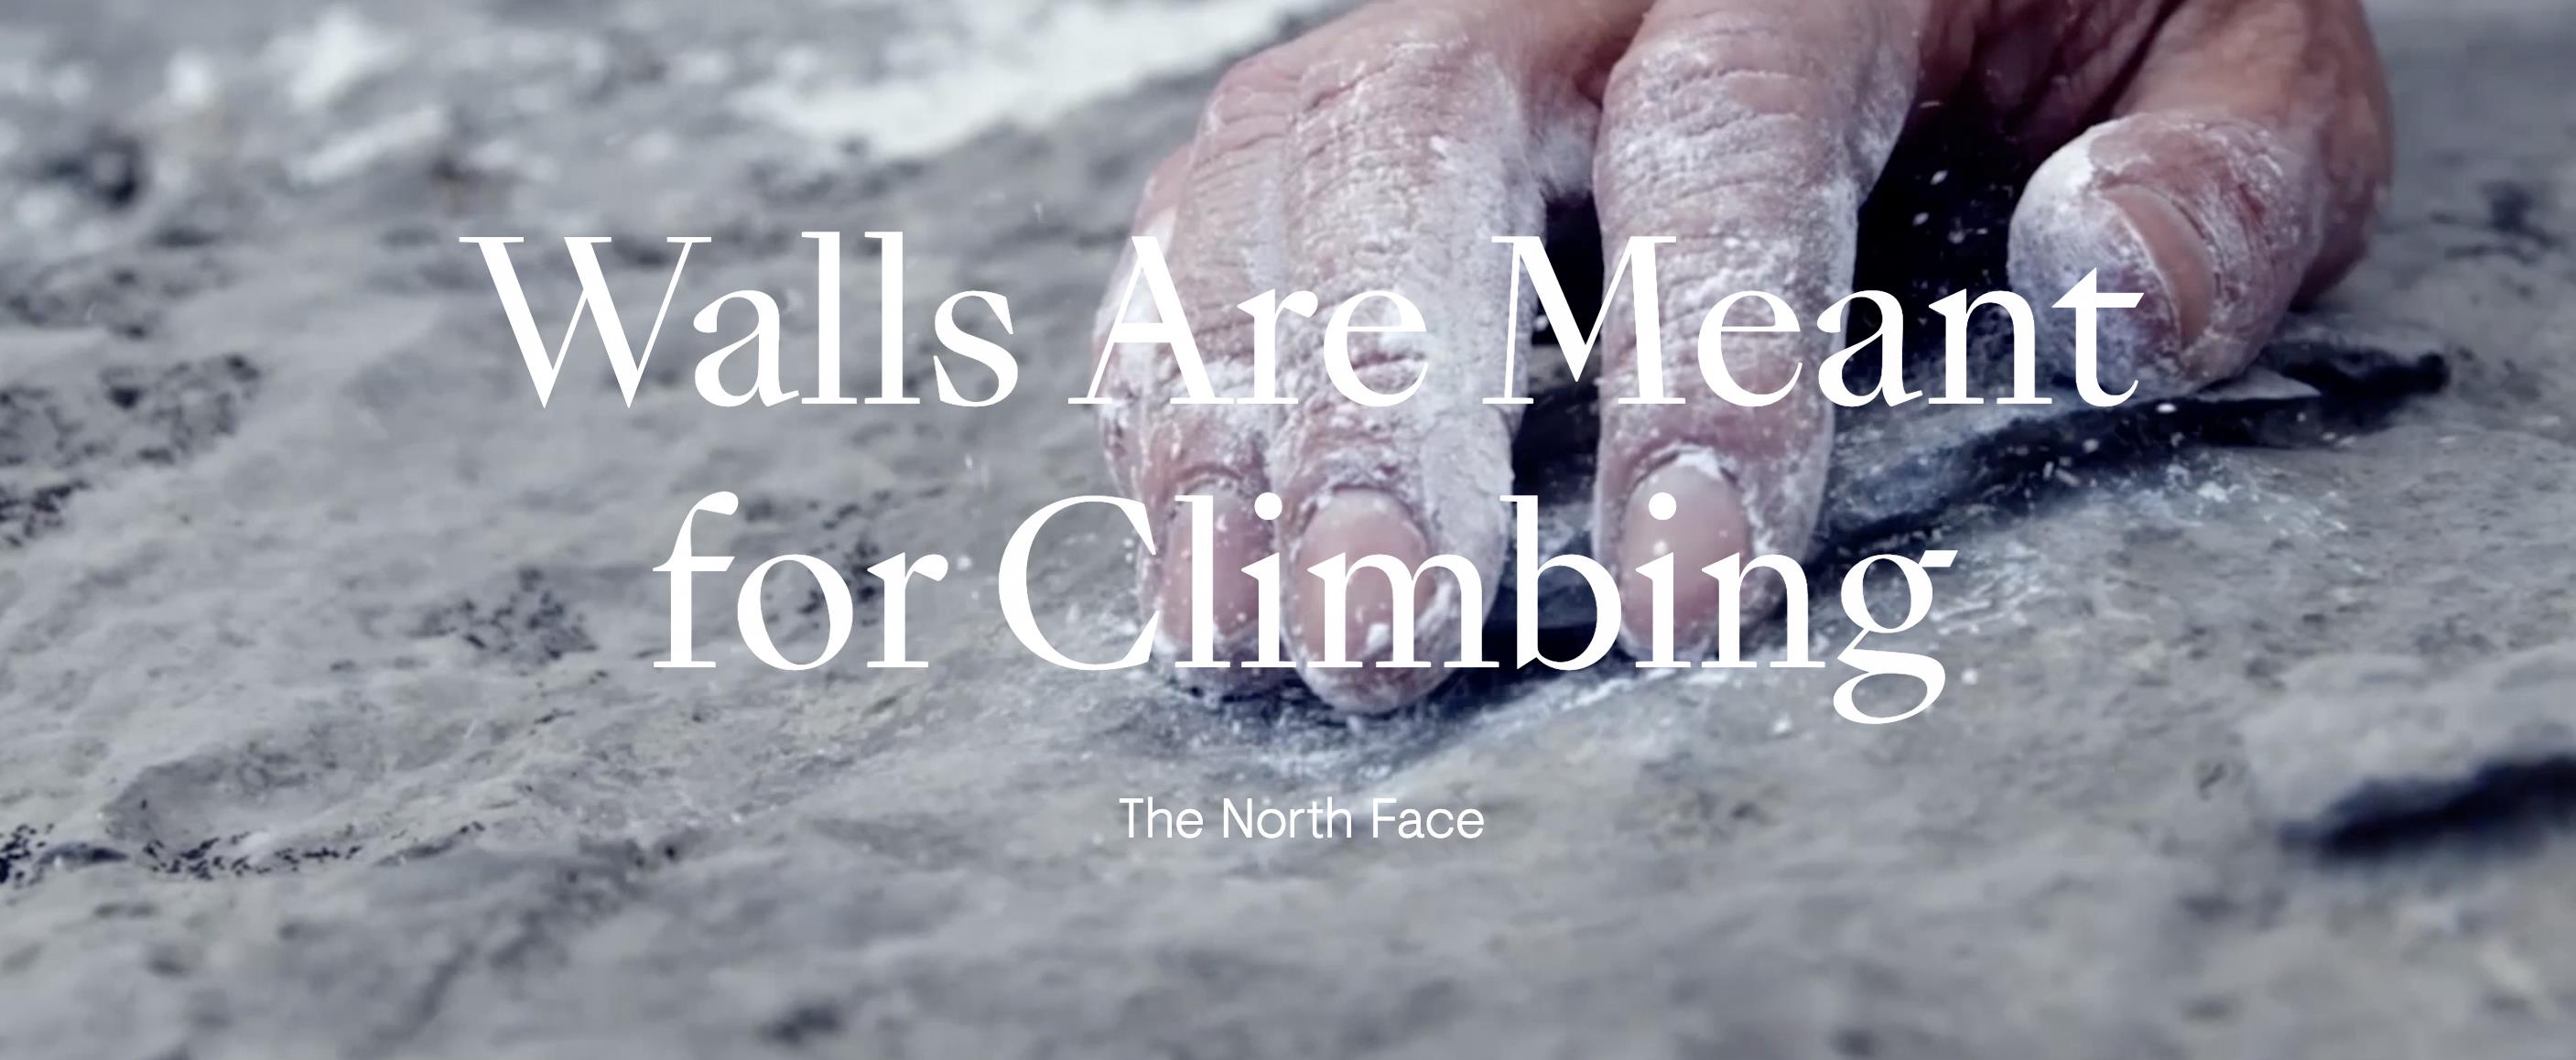 The North Face - Walls Are Meant For Climbing